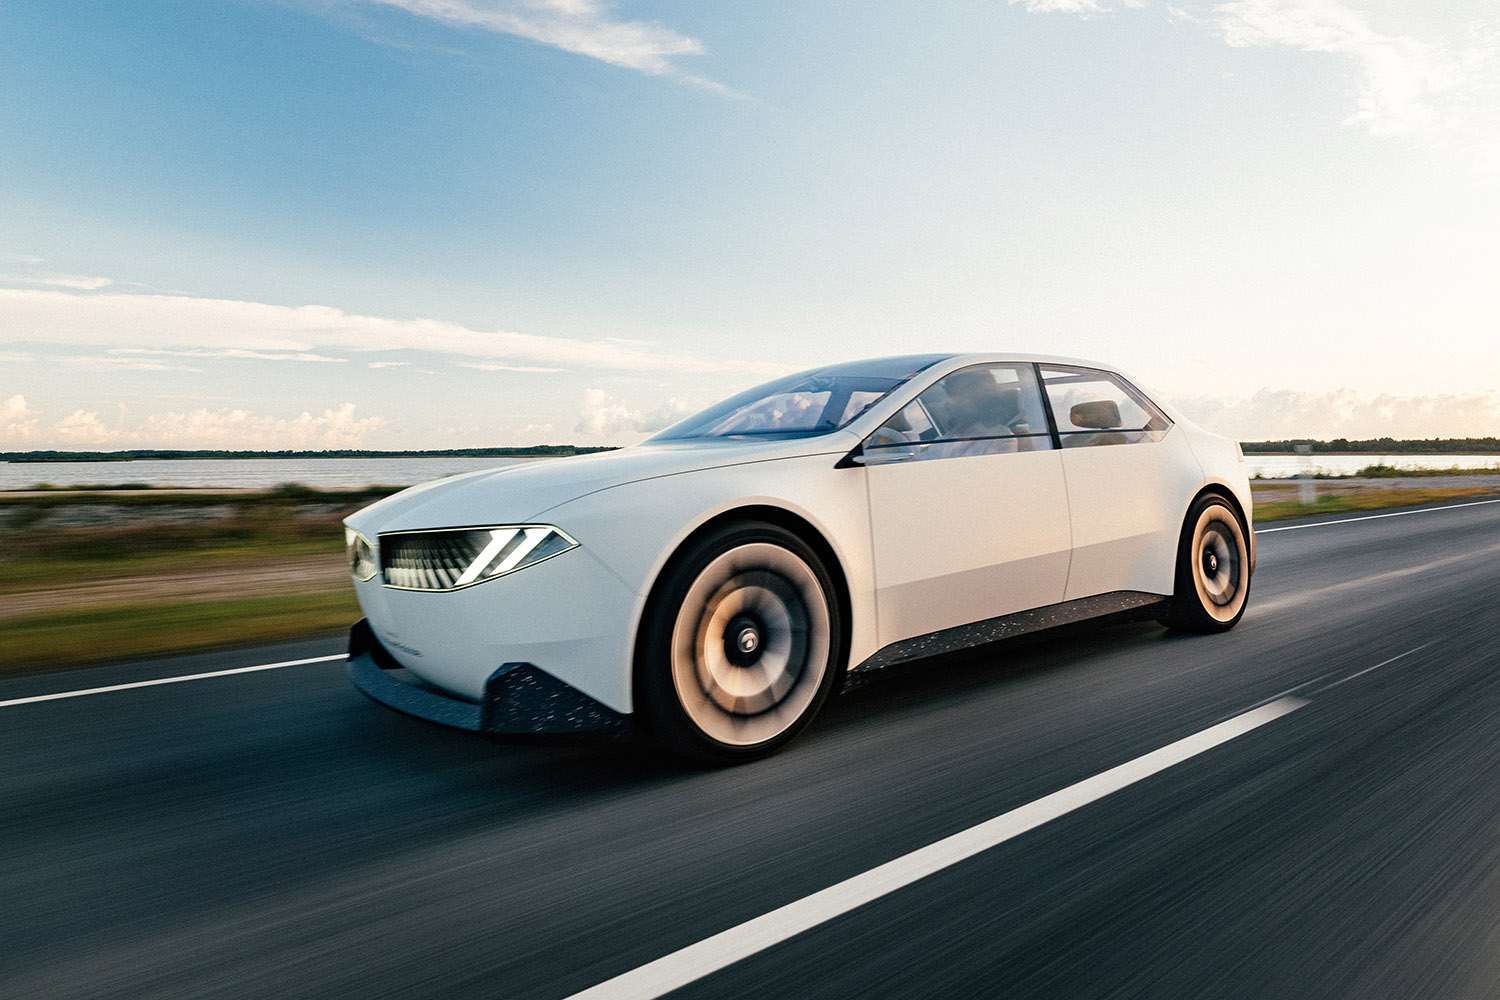 BMW Vision Neue Klasse in Joyous Bright off-white driving along a lake-adjacent road